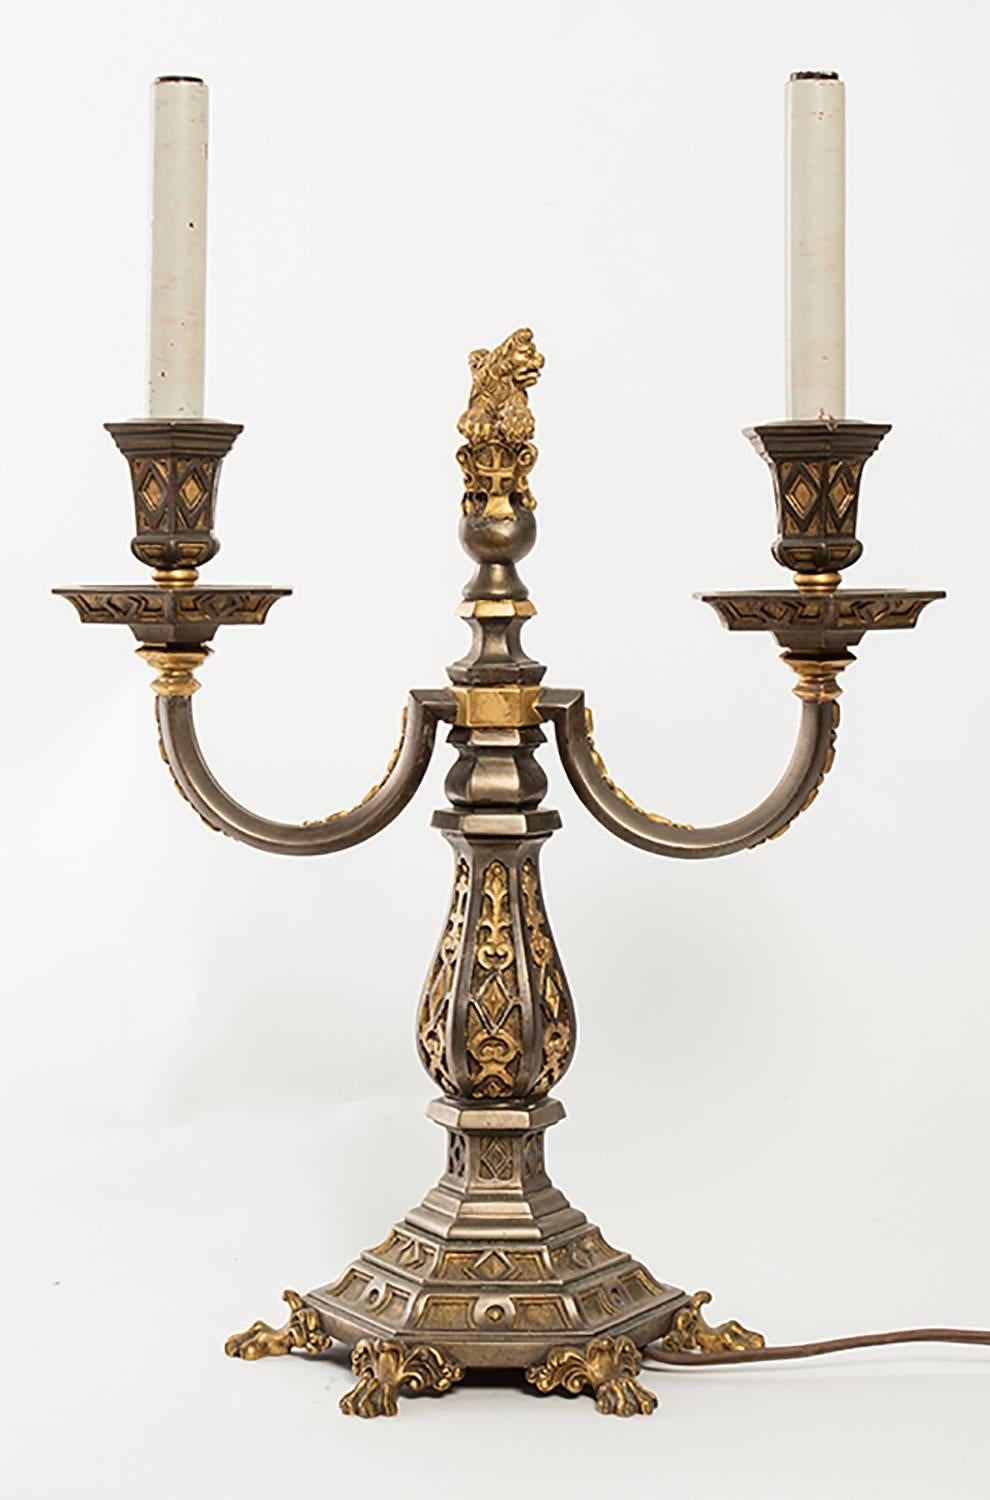 Pair of Caldwell quality candelabra lamps with ornate lion finials.